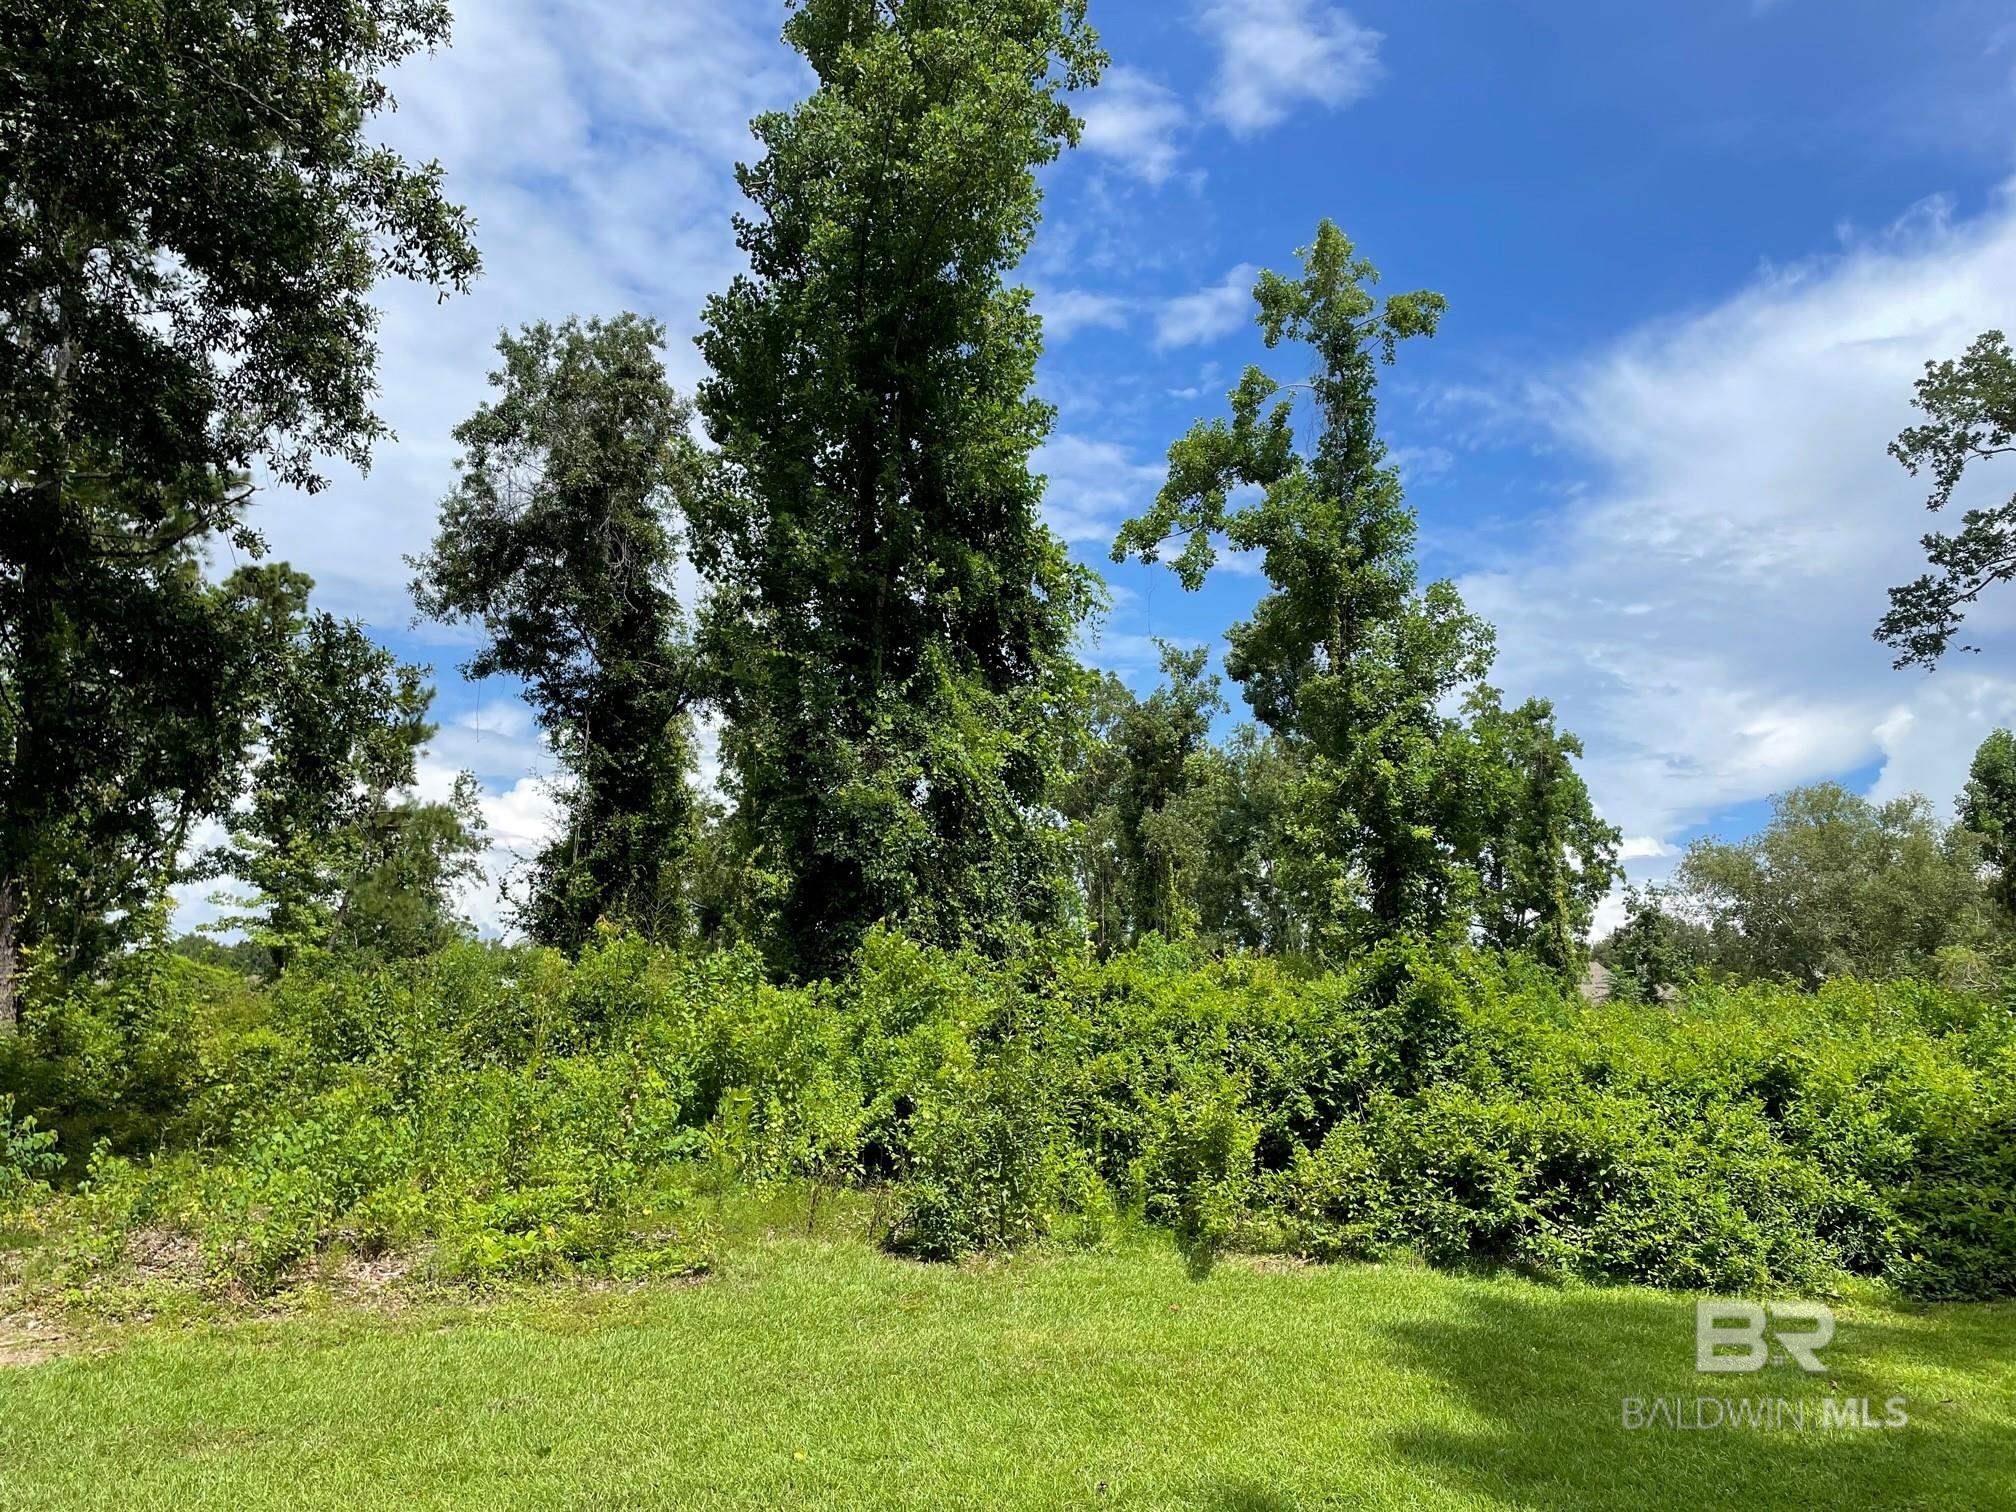 Now is your chance to own a beautiful, large, undeveloped lot in the elegant Polo Ridge neighborhood! You'll enjoy the stately, mature trees and tranquility this property has to offer - and just minutes from downtown Fairhope! Call to schedule your private showing today!